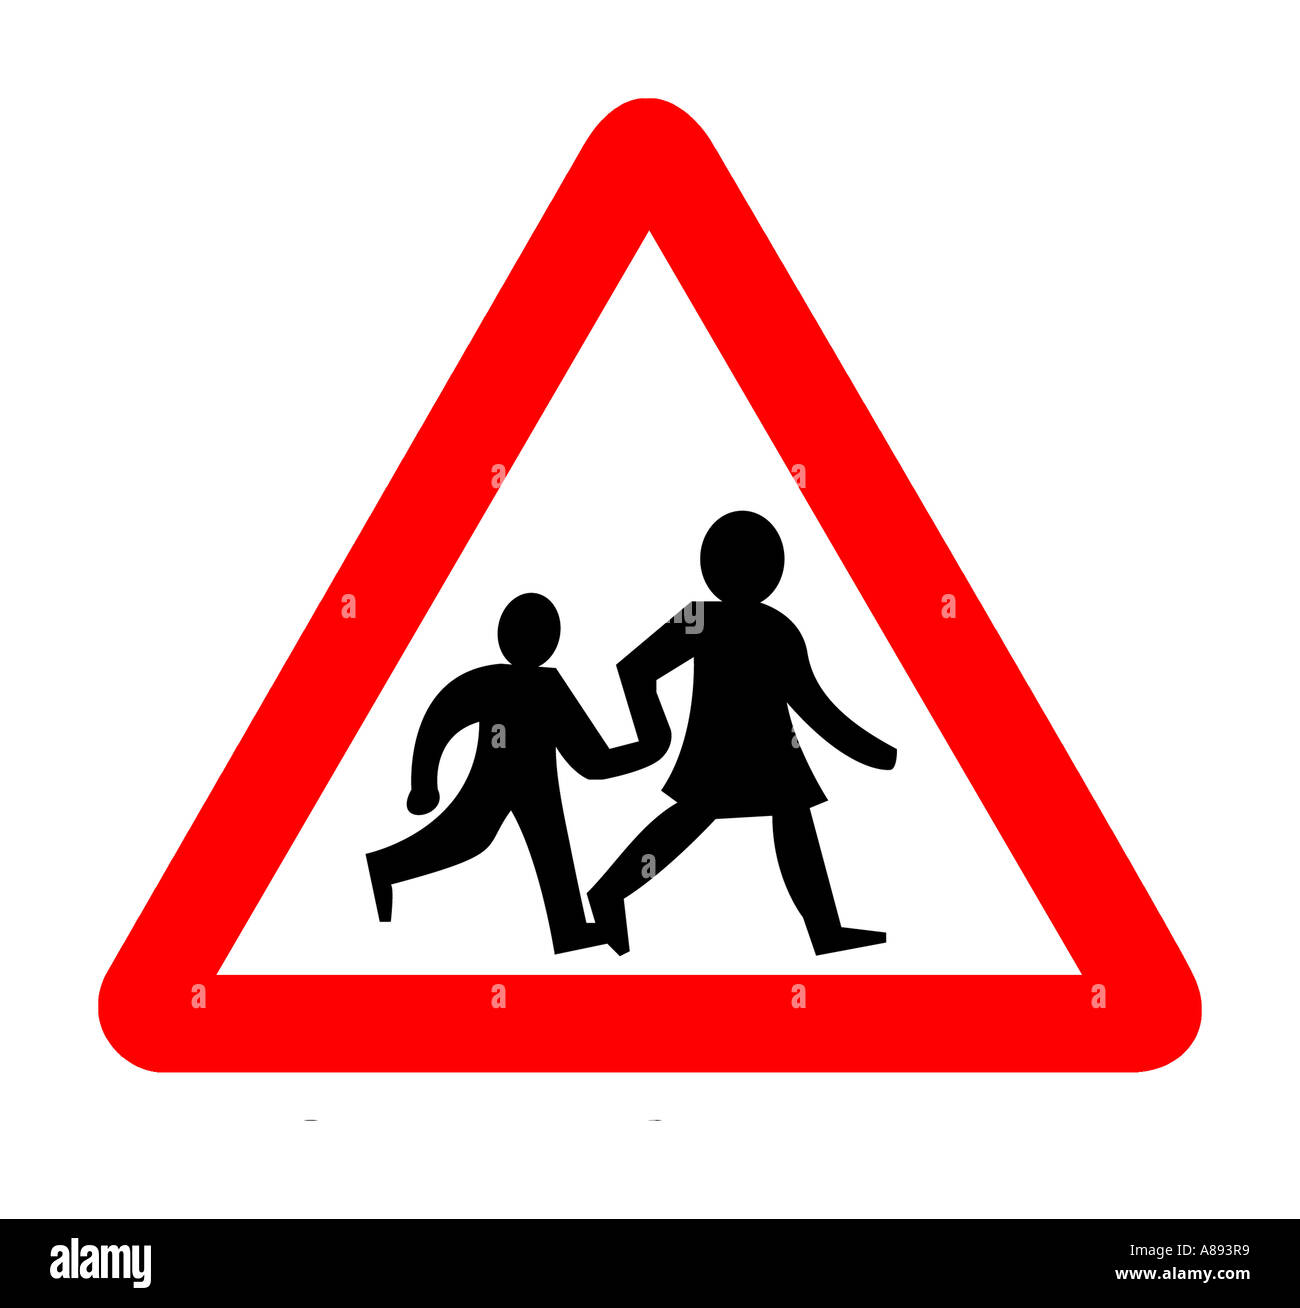 Children Crossing Road sign on white background Stock Photo - Alamy